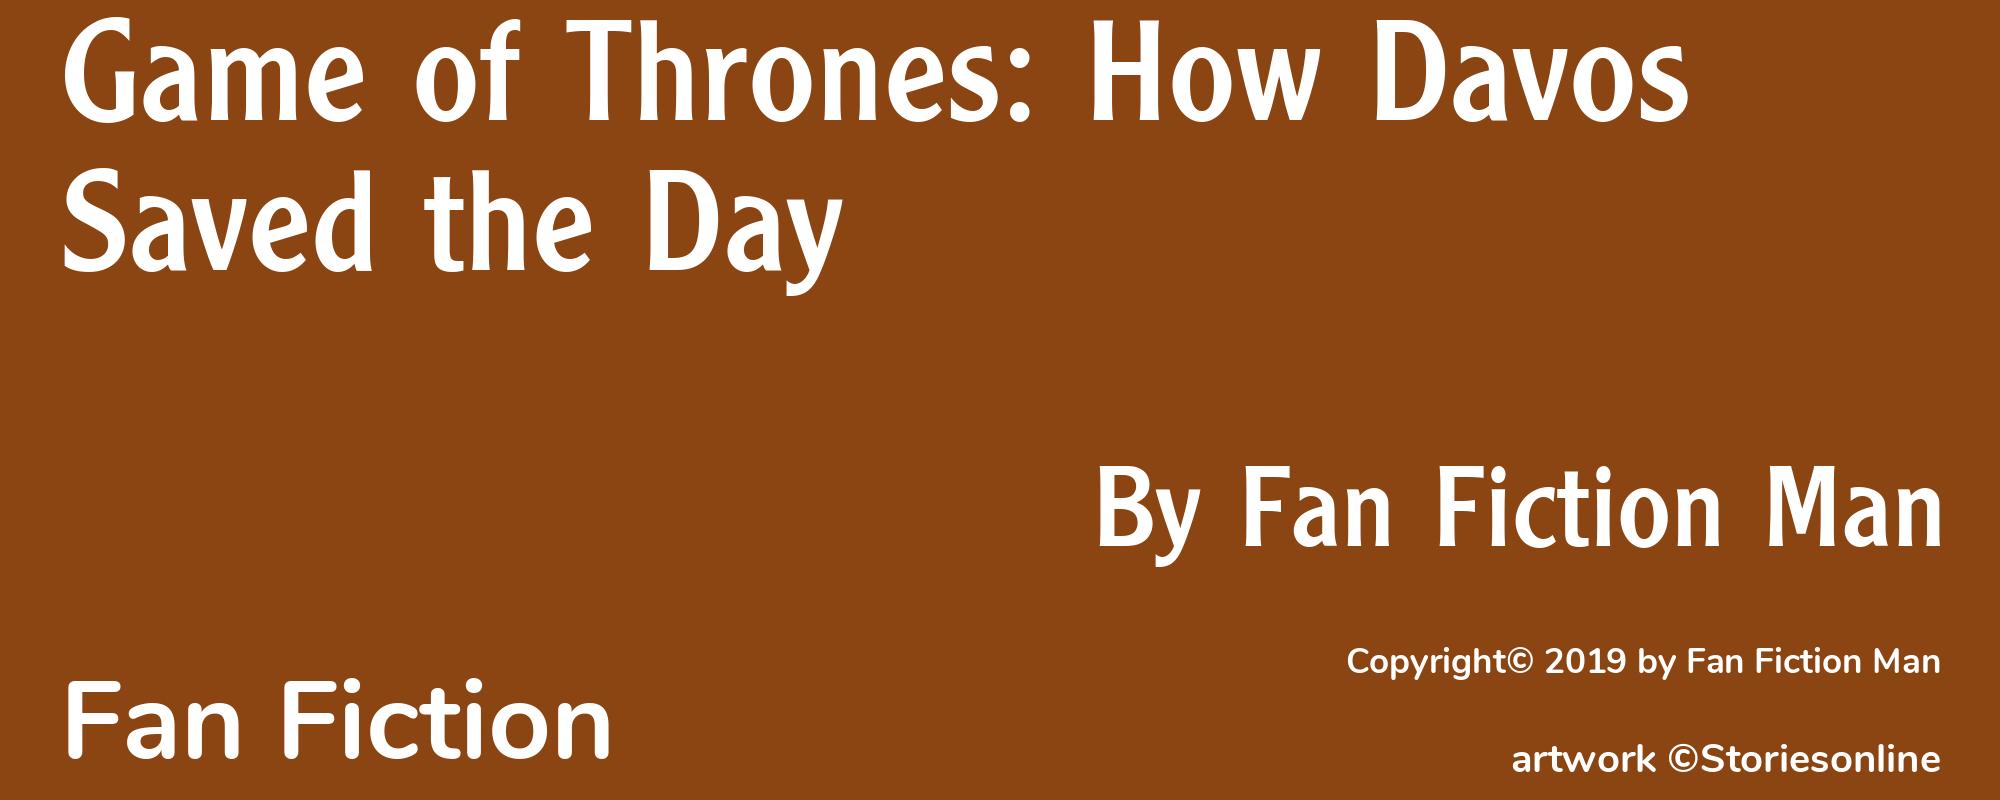 Game of Thrones: How Davos Saved the Day - Cover